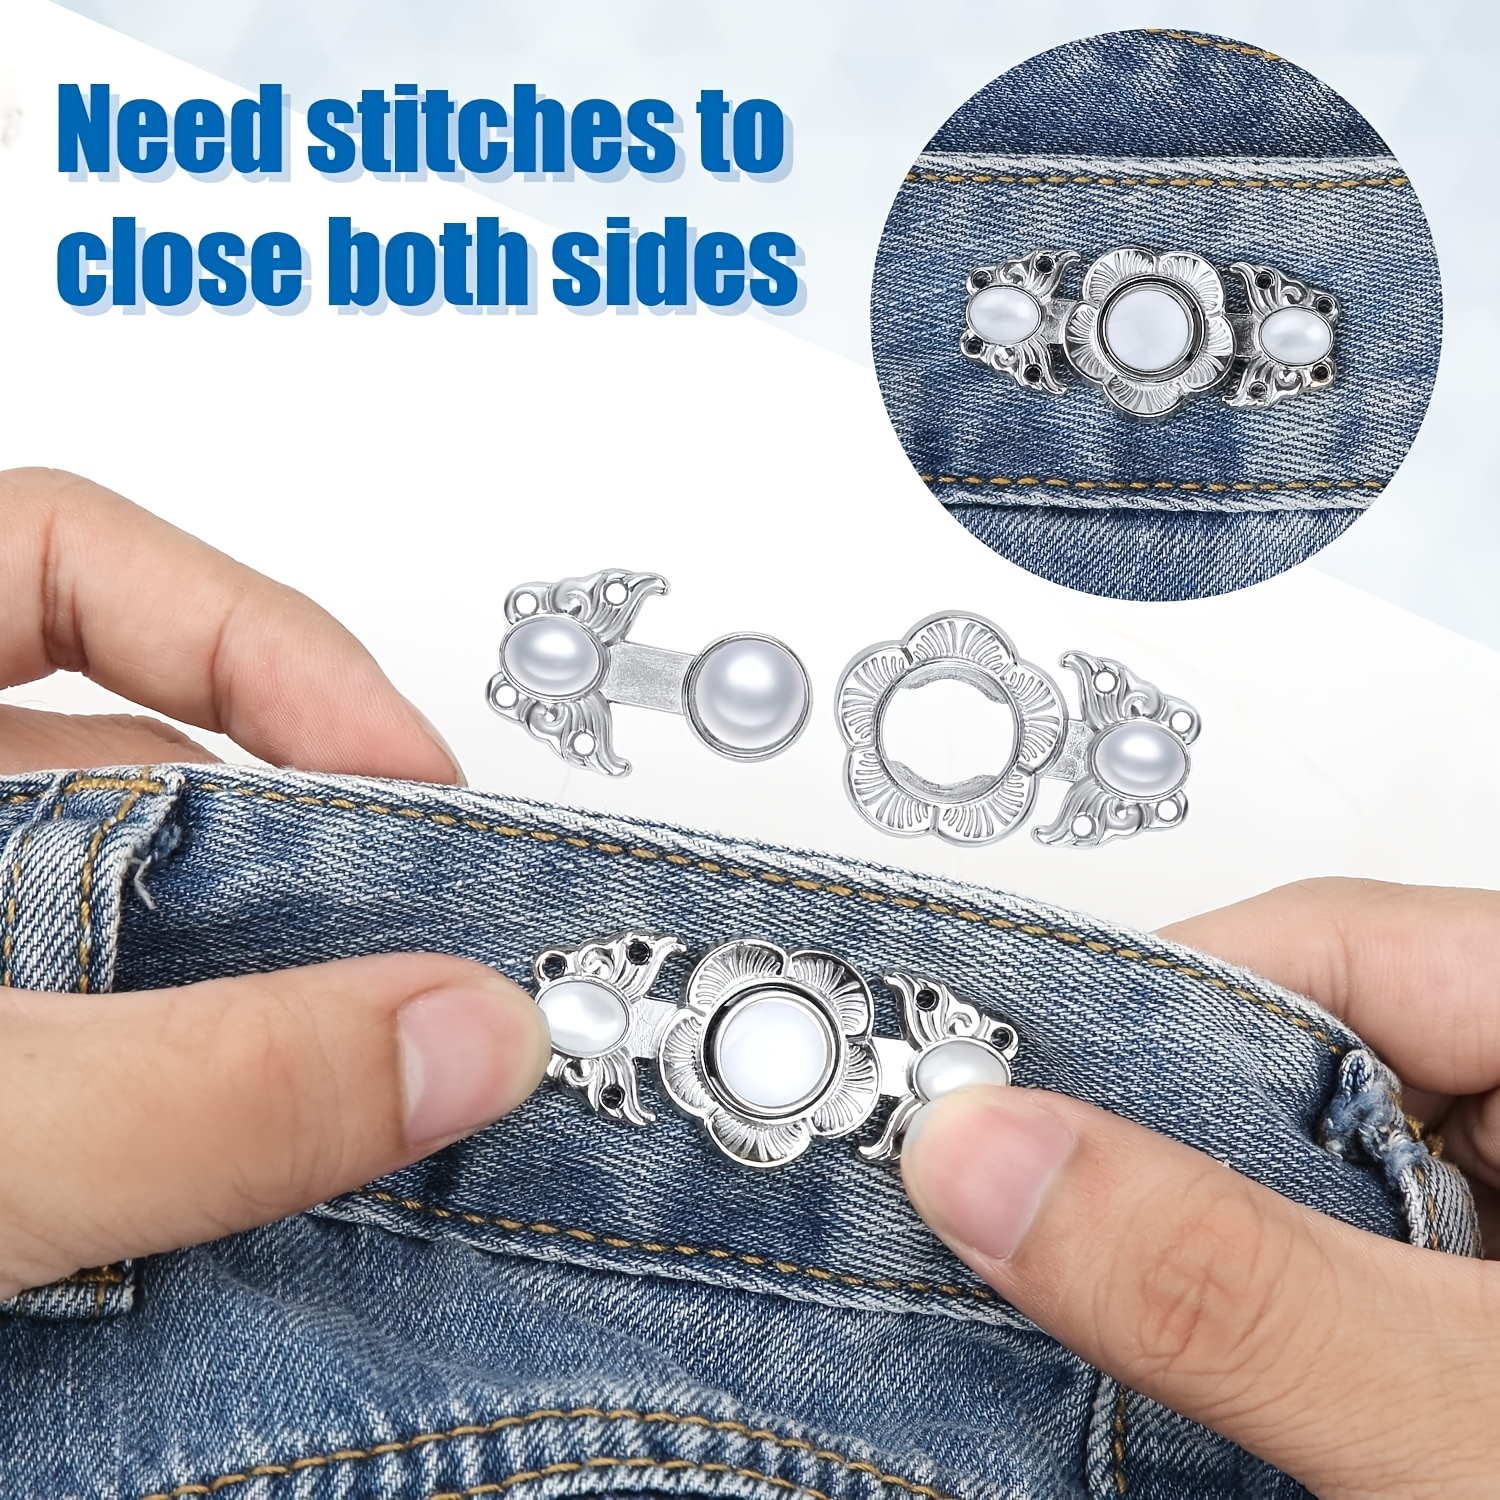  6 Pairs Bear Buttons For Jean Clips To Tighten Waist Pant  Size Adjuster Buttons For Jeans To Make Smaller Cute Bear Waist Pant  Adjustable Button Fit Tighten Pant Bear Adjustable